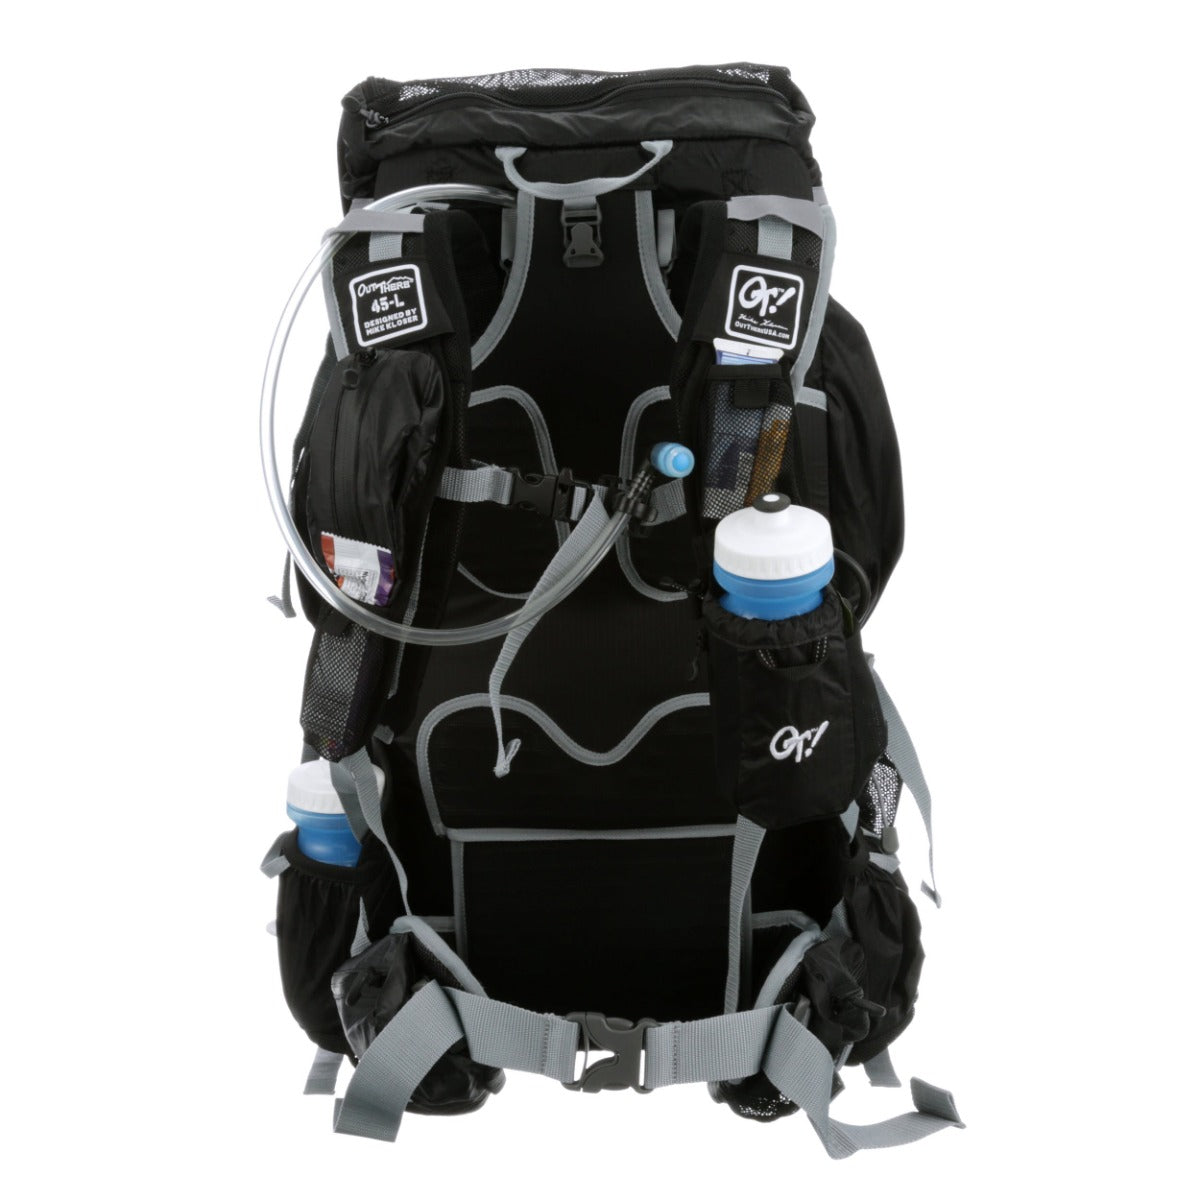 Outthere 45 liter backpack